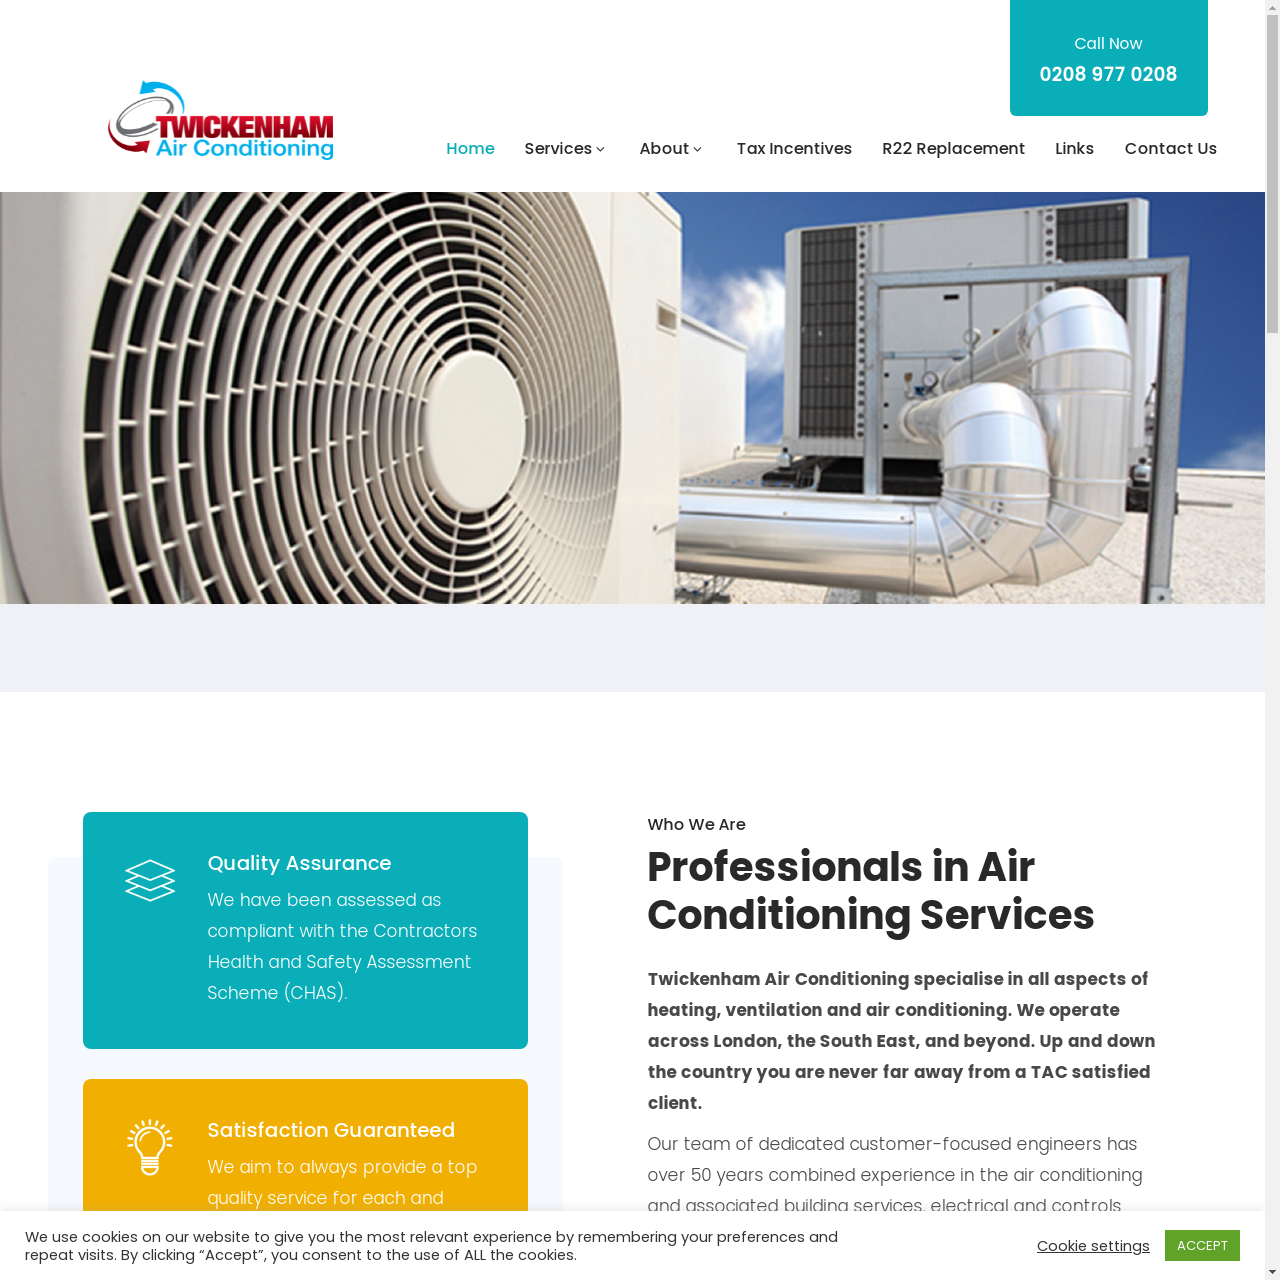 Twickenham Air Conditioing Website, designed and developed by MK Web